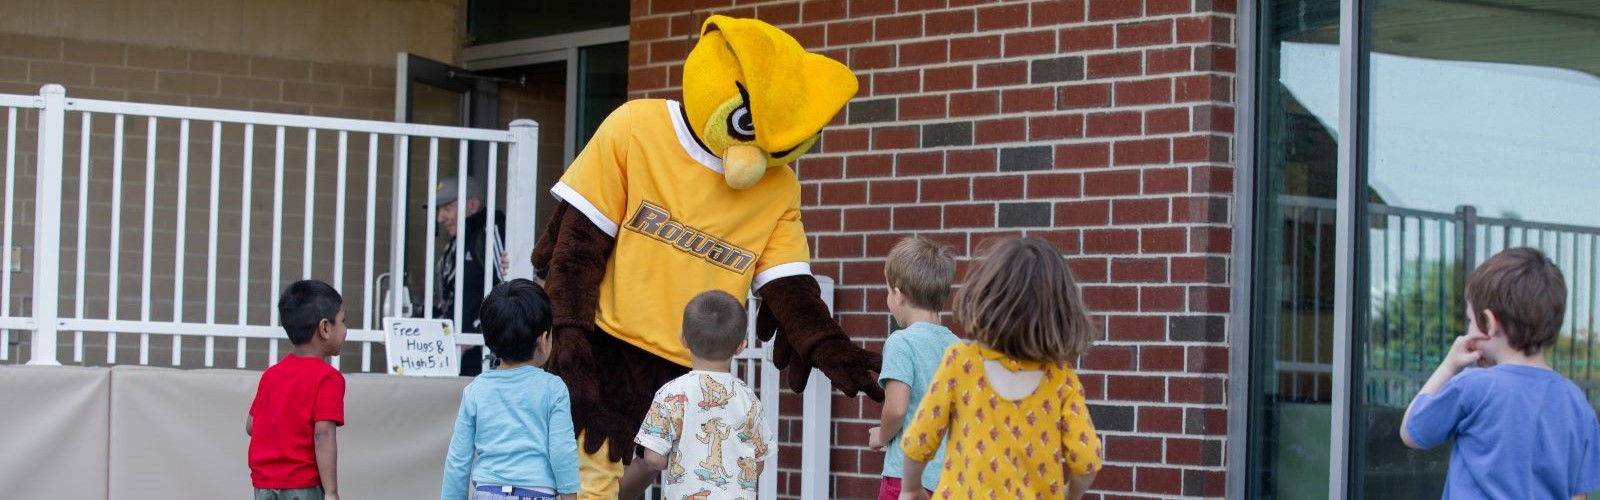 Prof mascot playing with kids.